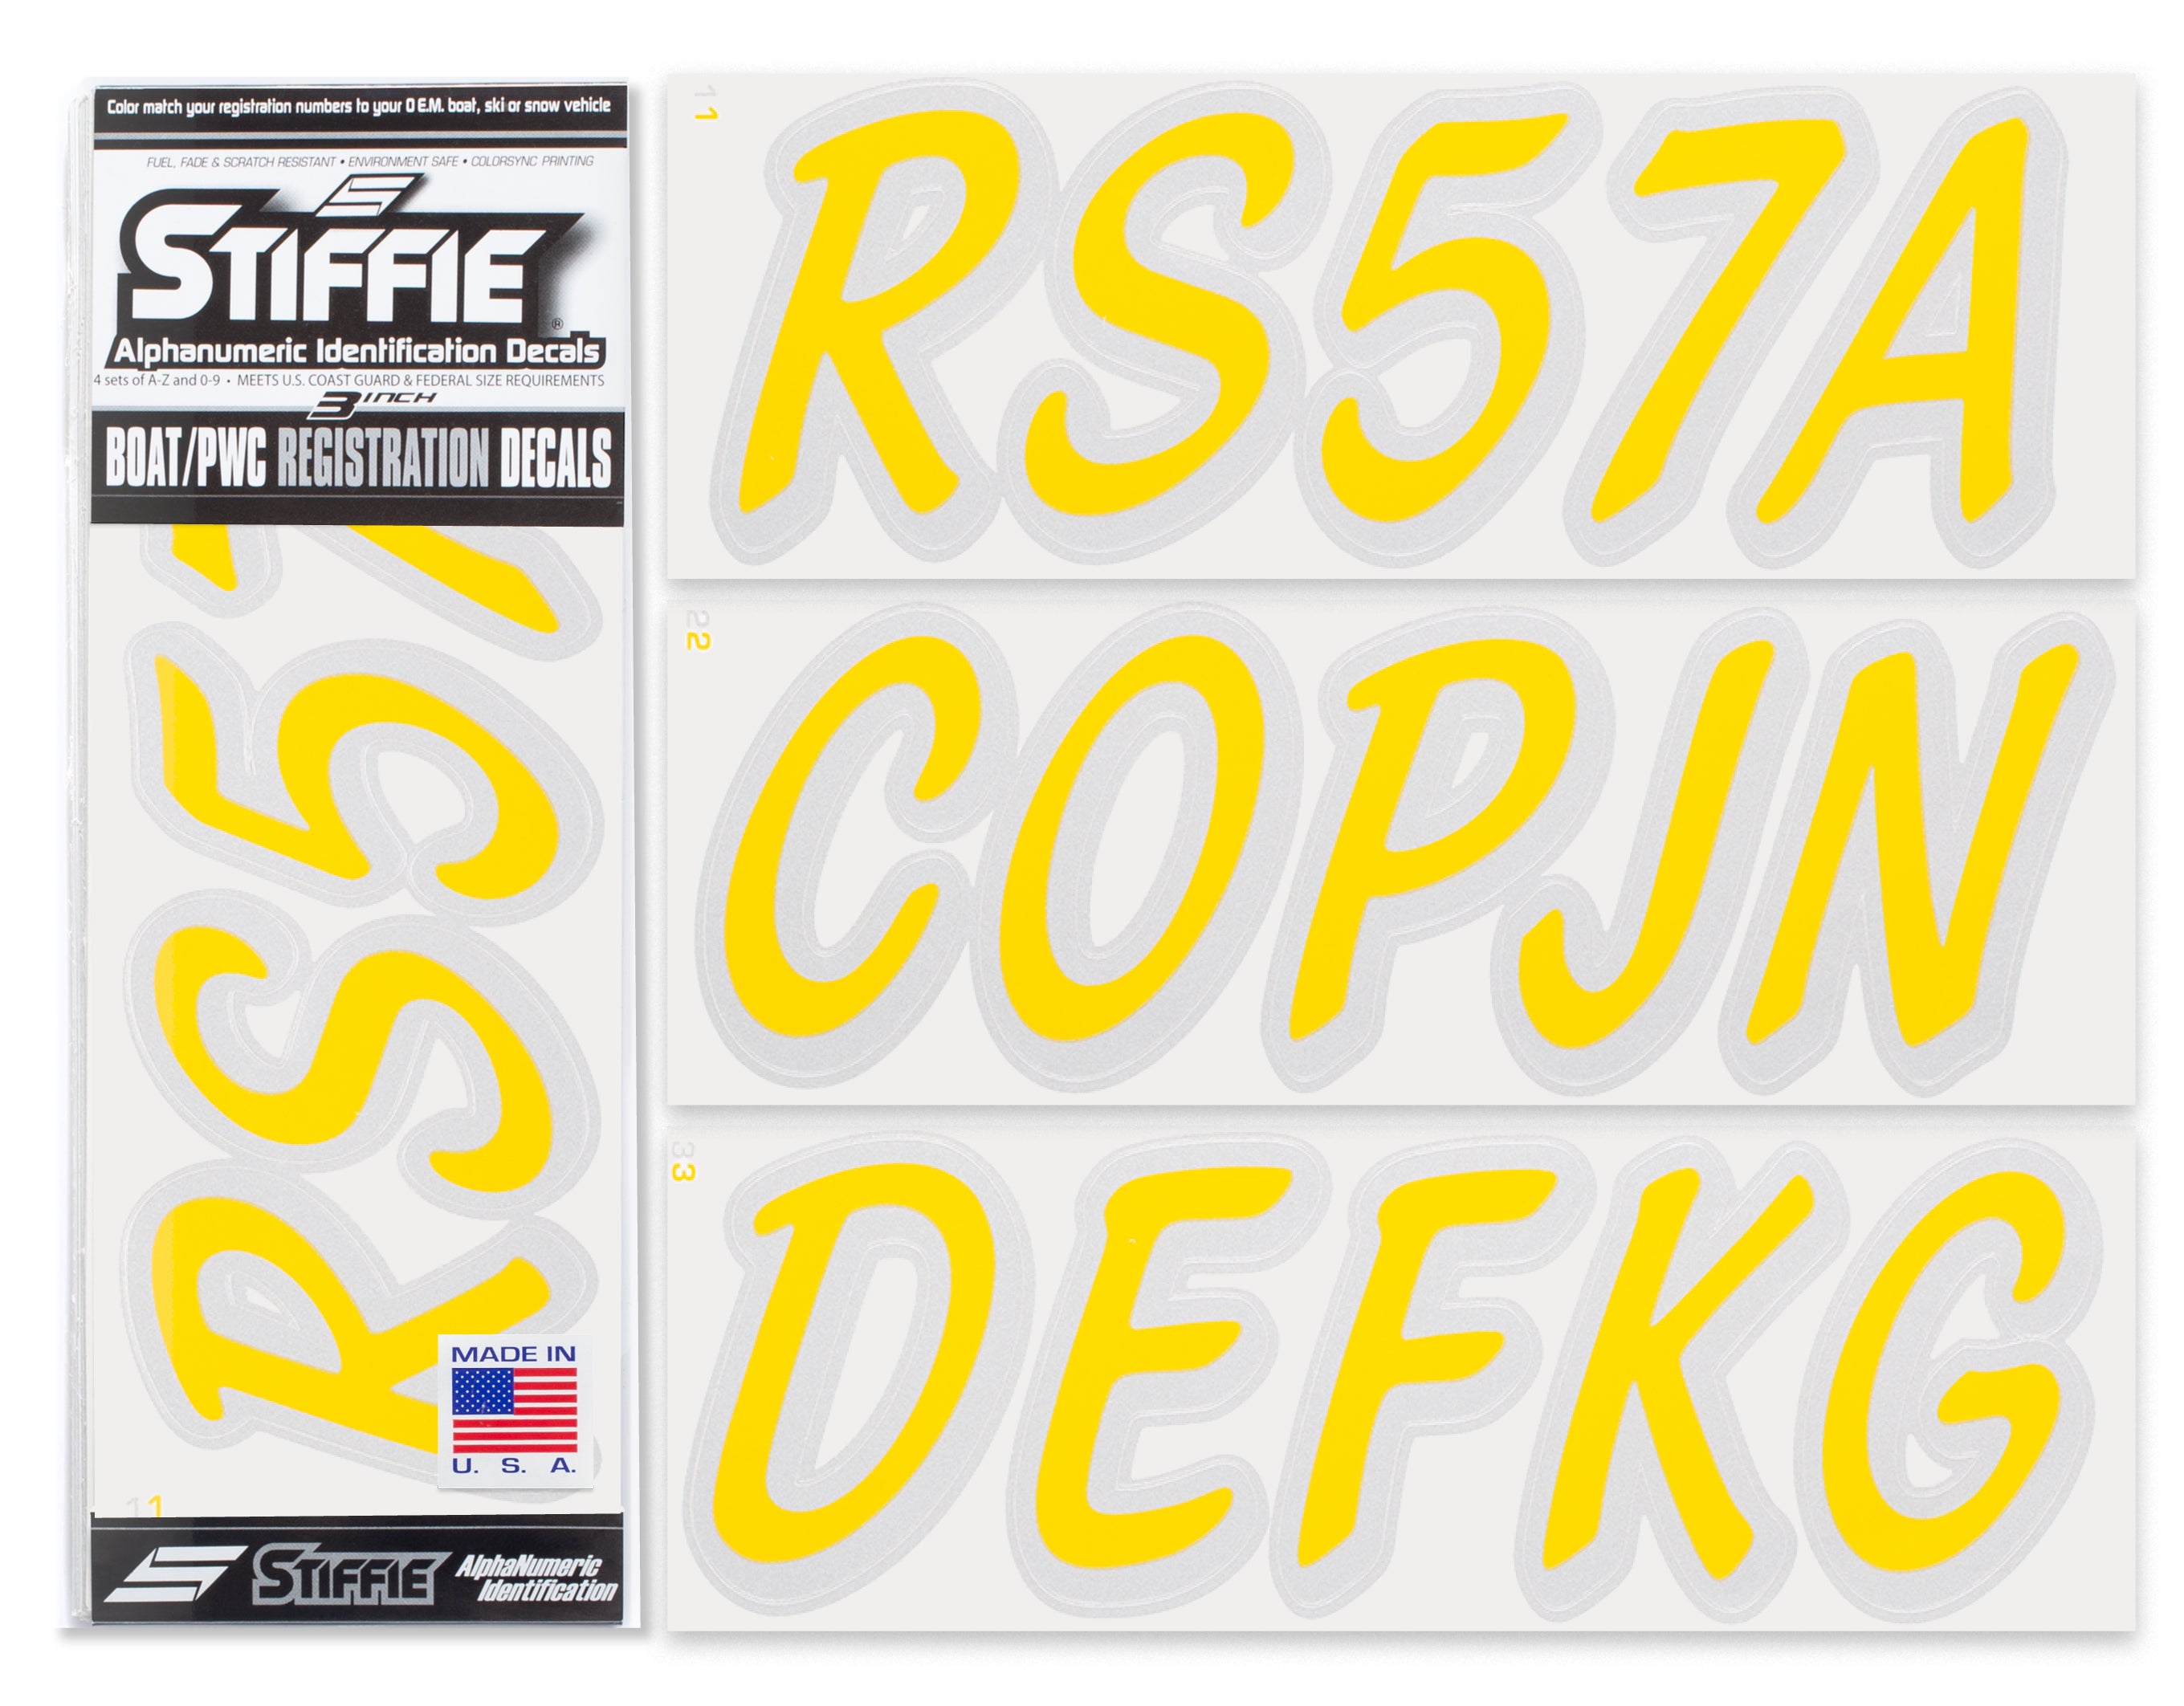 STIFFIE Whipline Solid Yellow/Metallic Silver 3" Alpha-Numeric Registration Identification Numbers Stickers Decals for Boats & Personal Watercraft